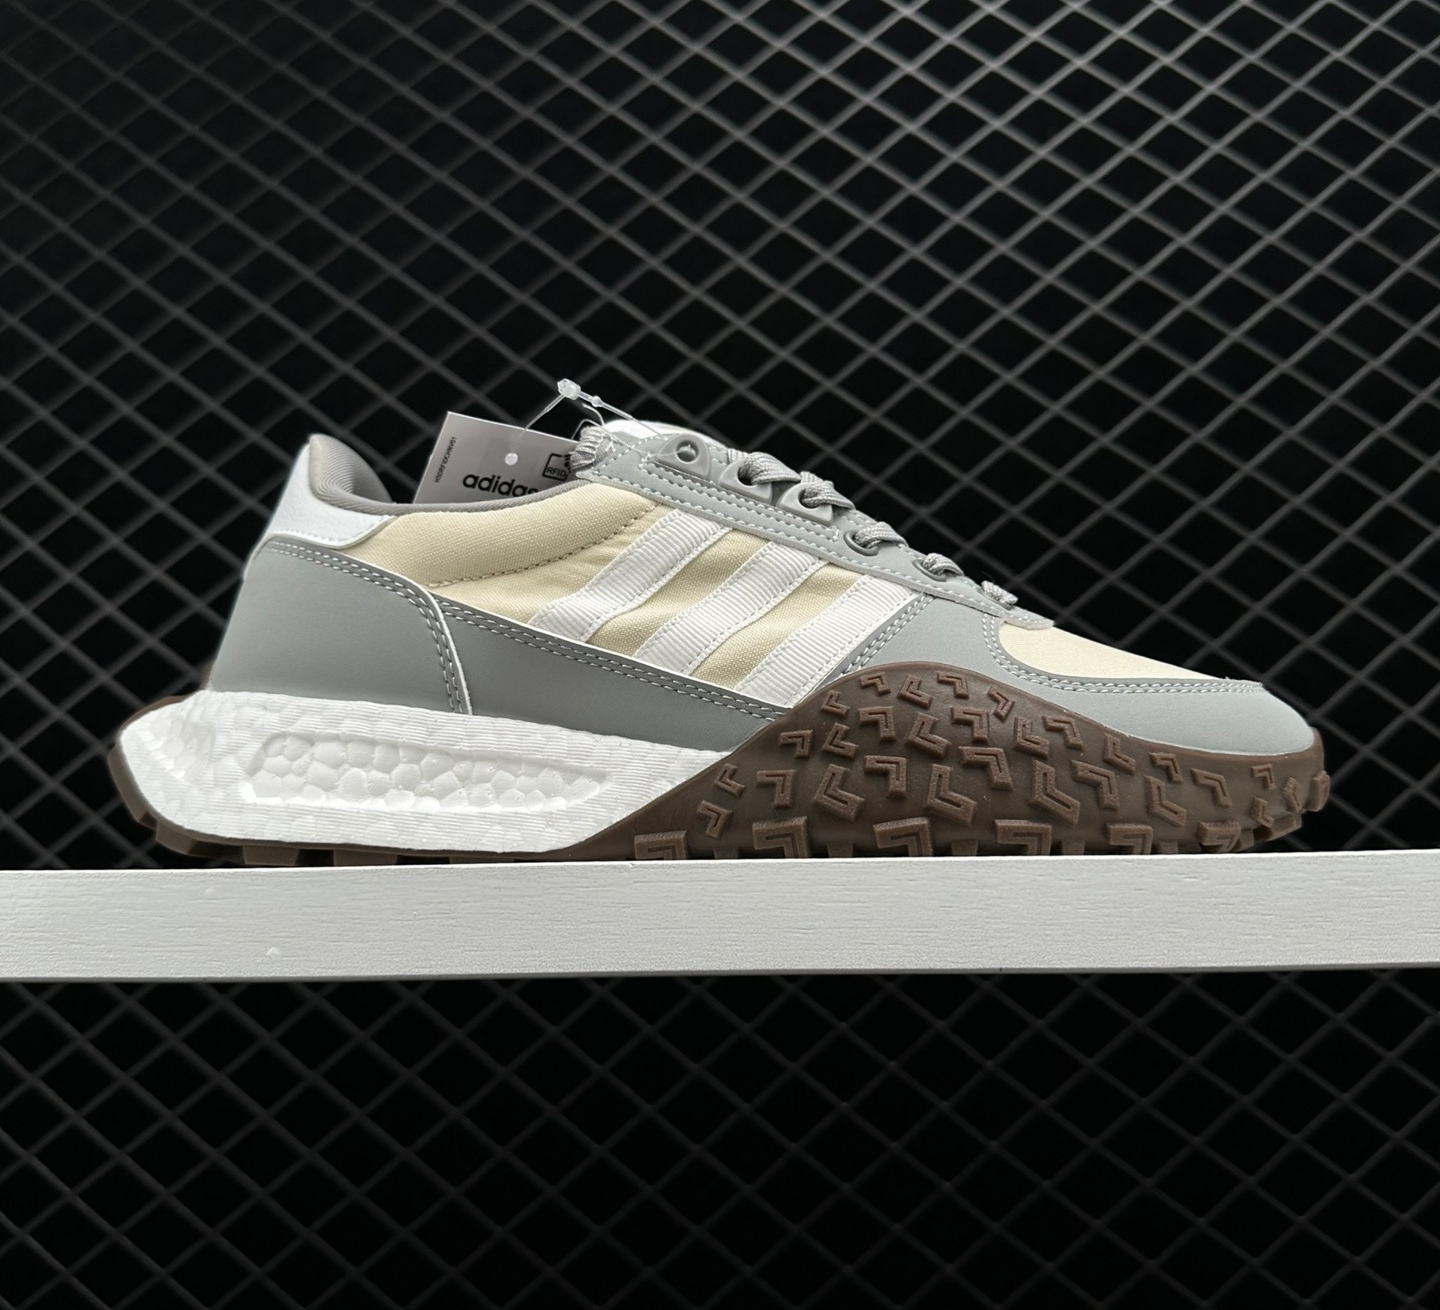 Adidas Retropy E5 W.R.P. - Top Performance Running Shoes for Maximum Comfort & Speed